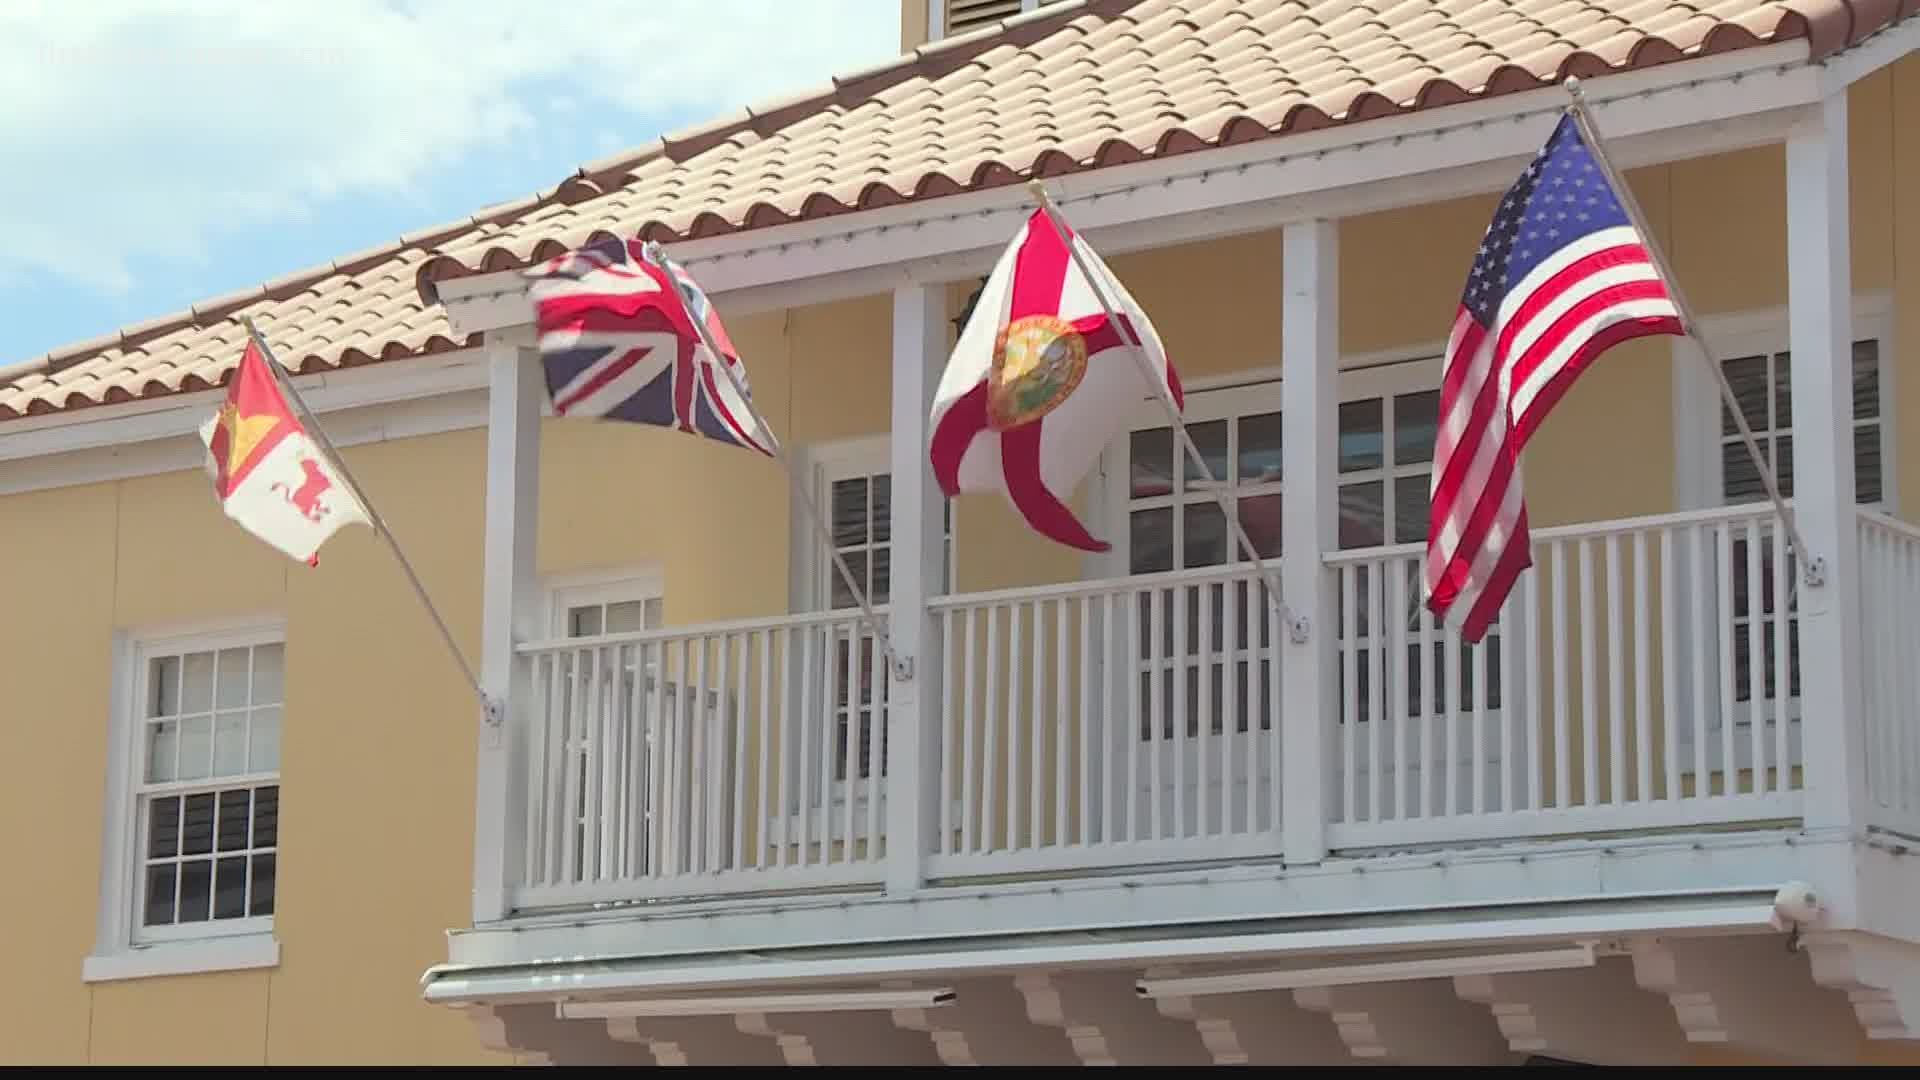 August is typically a slow month for hotels in St. Augustine, but the RNC may change that.